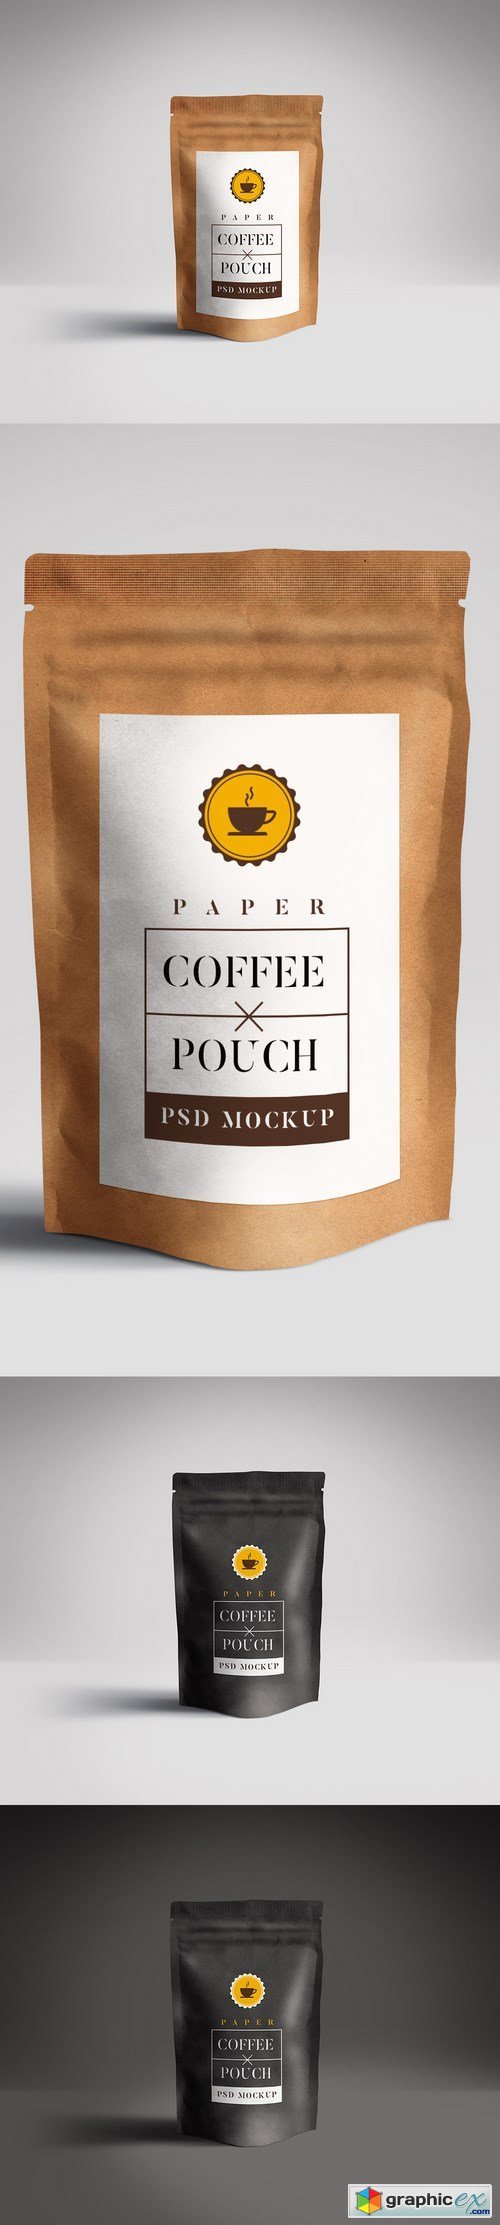 Paper Pouch Packaging Mockup PSD